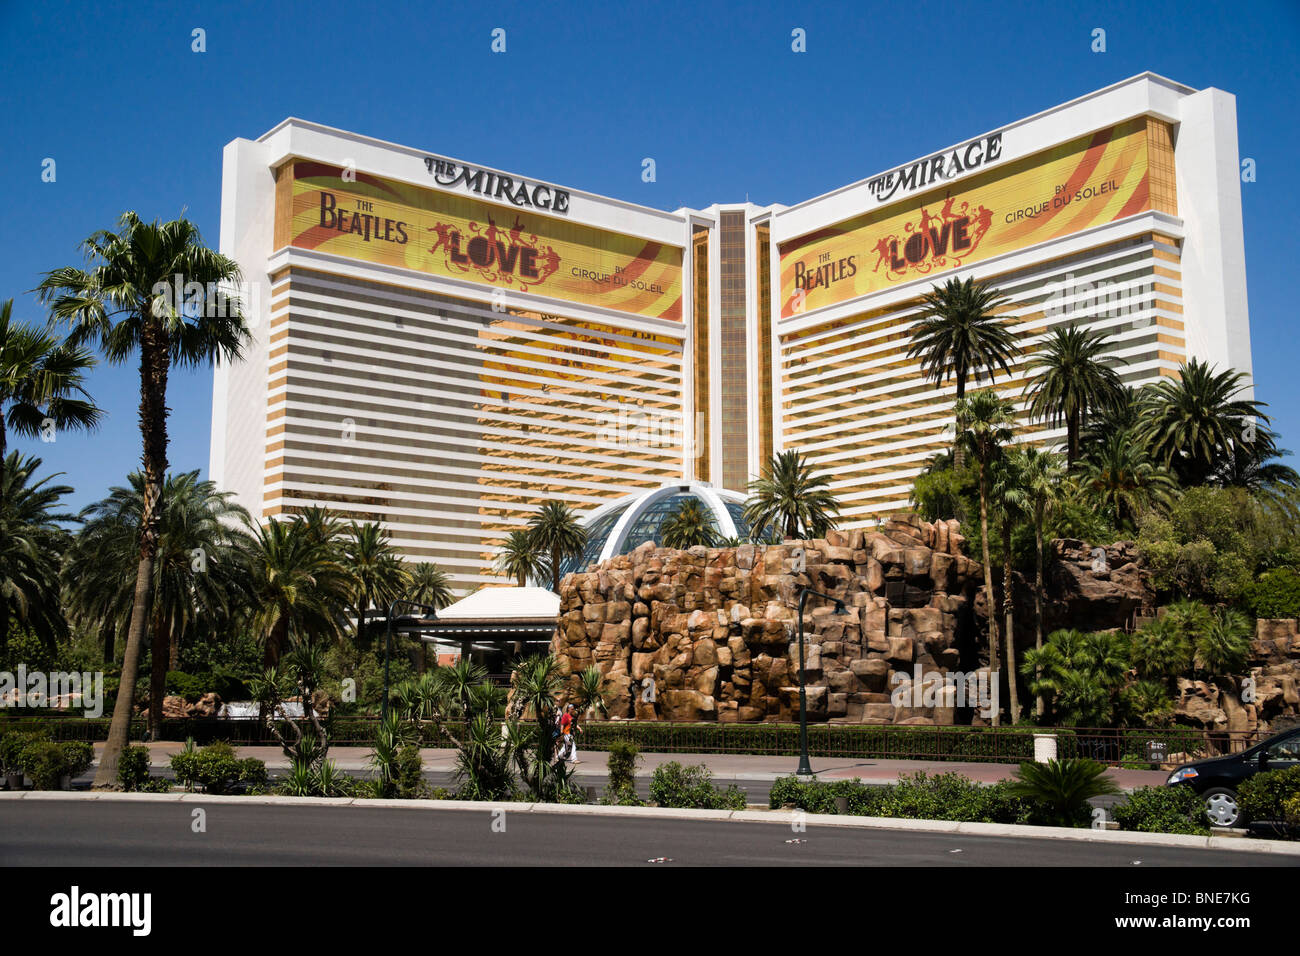 The Mirage, an MGM resort hotel on the Las Vegas strip, with Cirque du  Soleil advert Beatles 'Love' show Stock Photo - Alamy